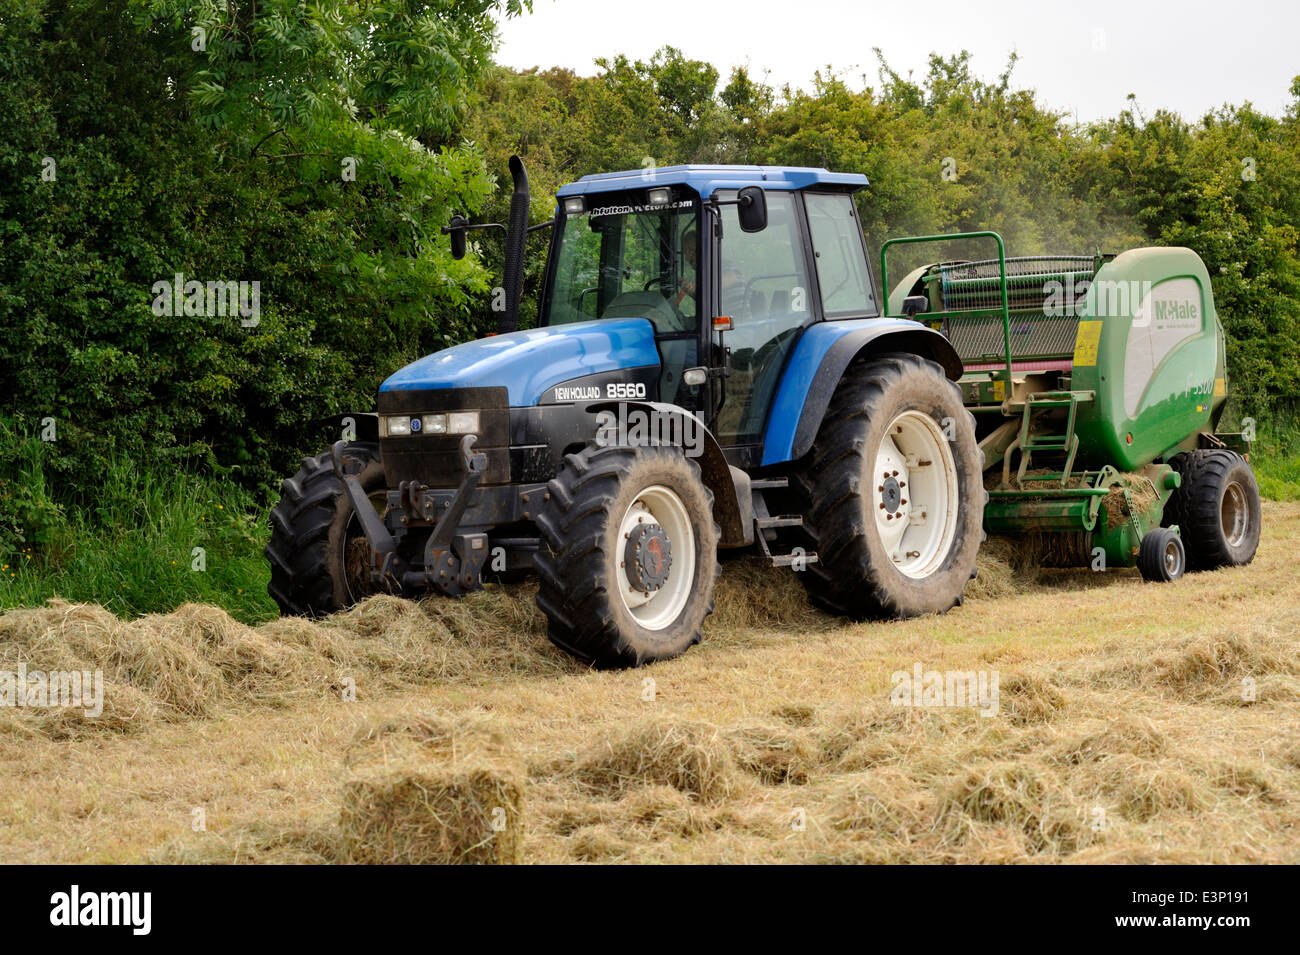 Tractor pulling machine, baler, for making big round bails of cut grass for hay or silage Stock Photo